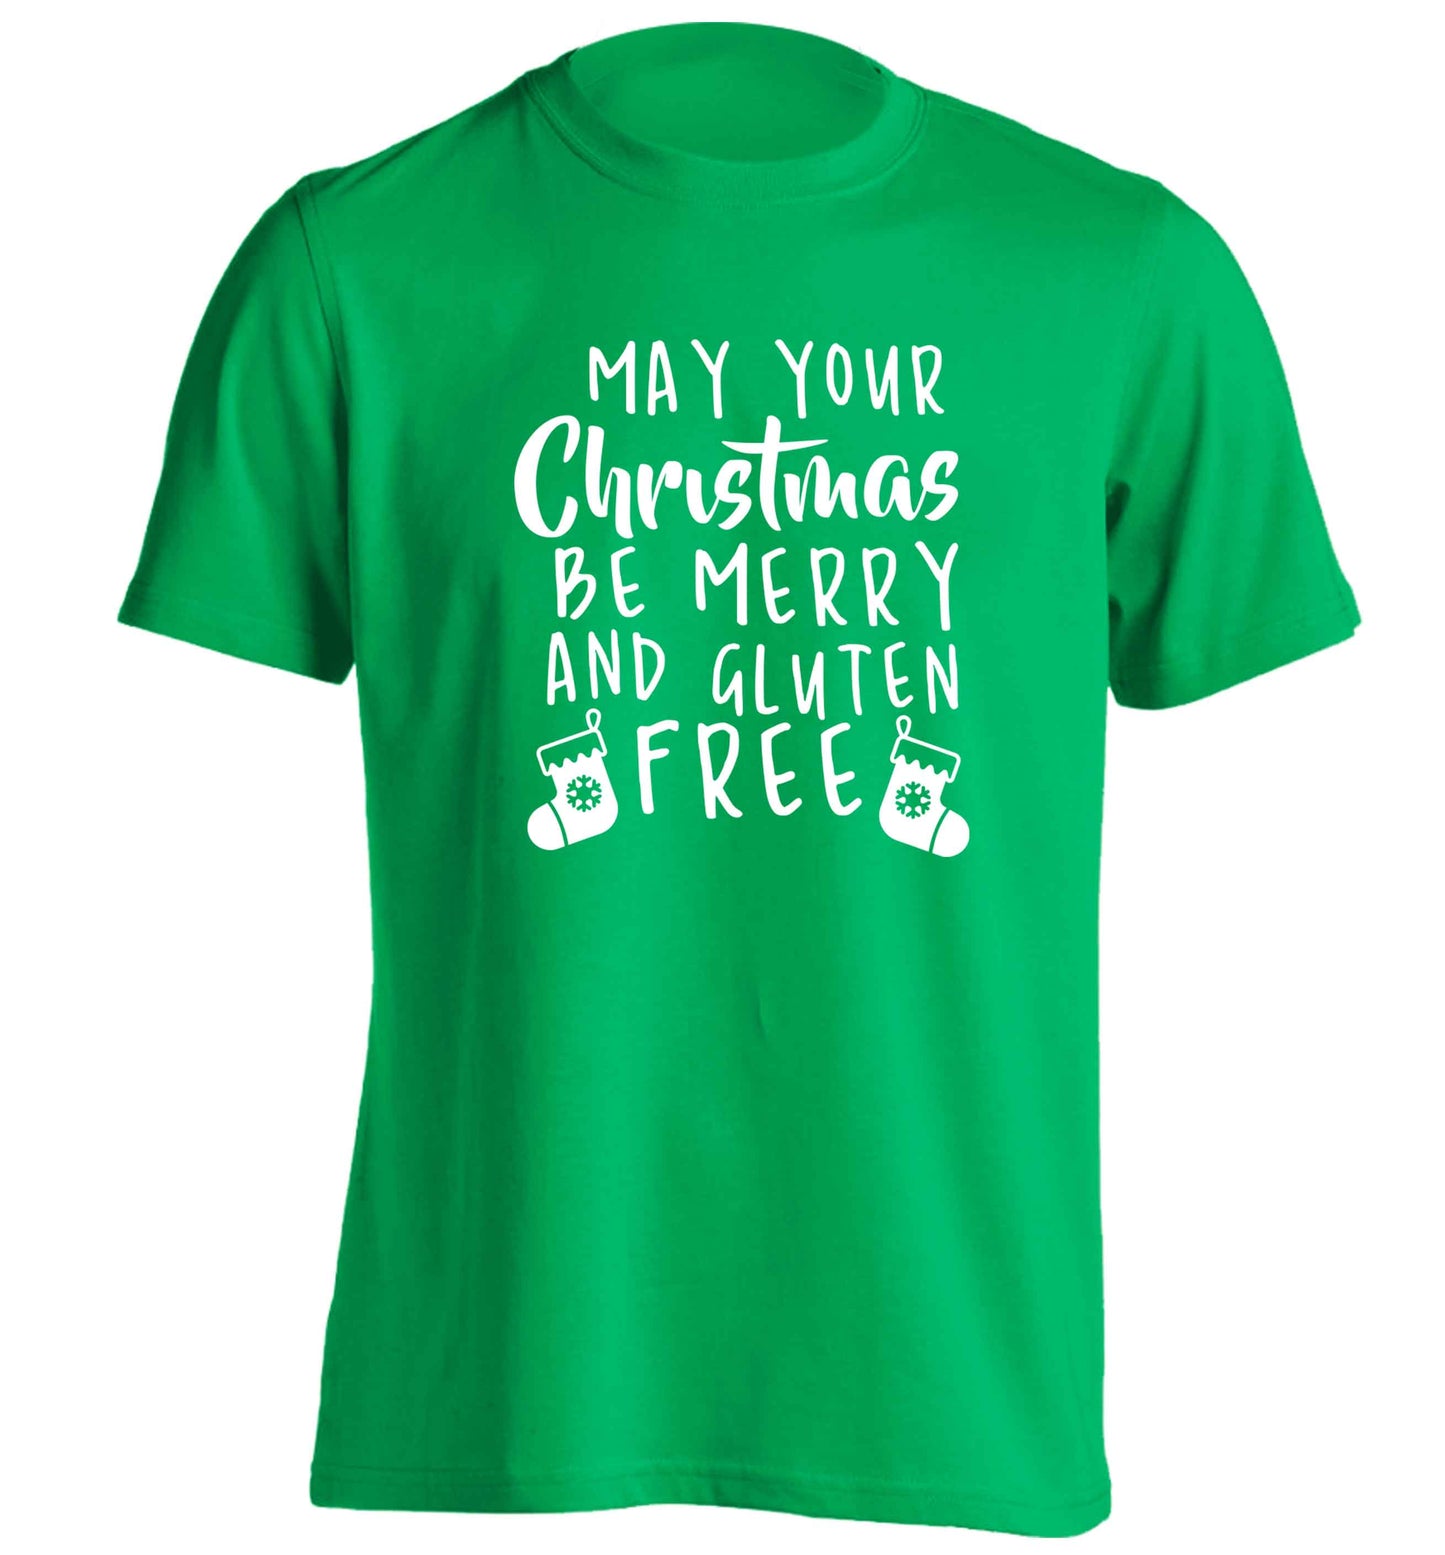 May your Christmas be merry and gluten free adults unisex green Tshirt 2XL